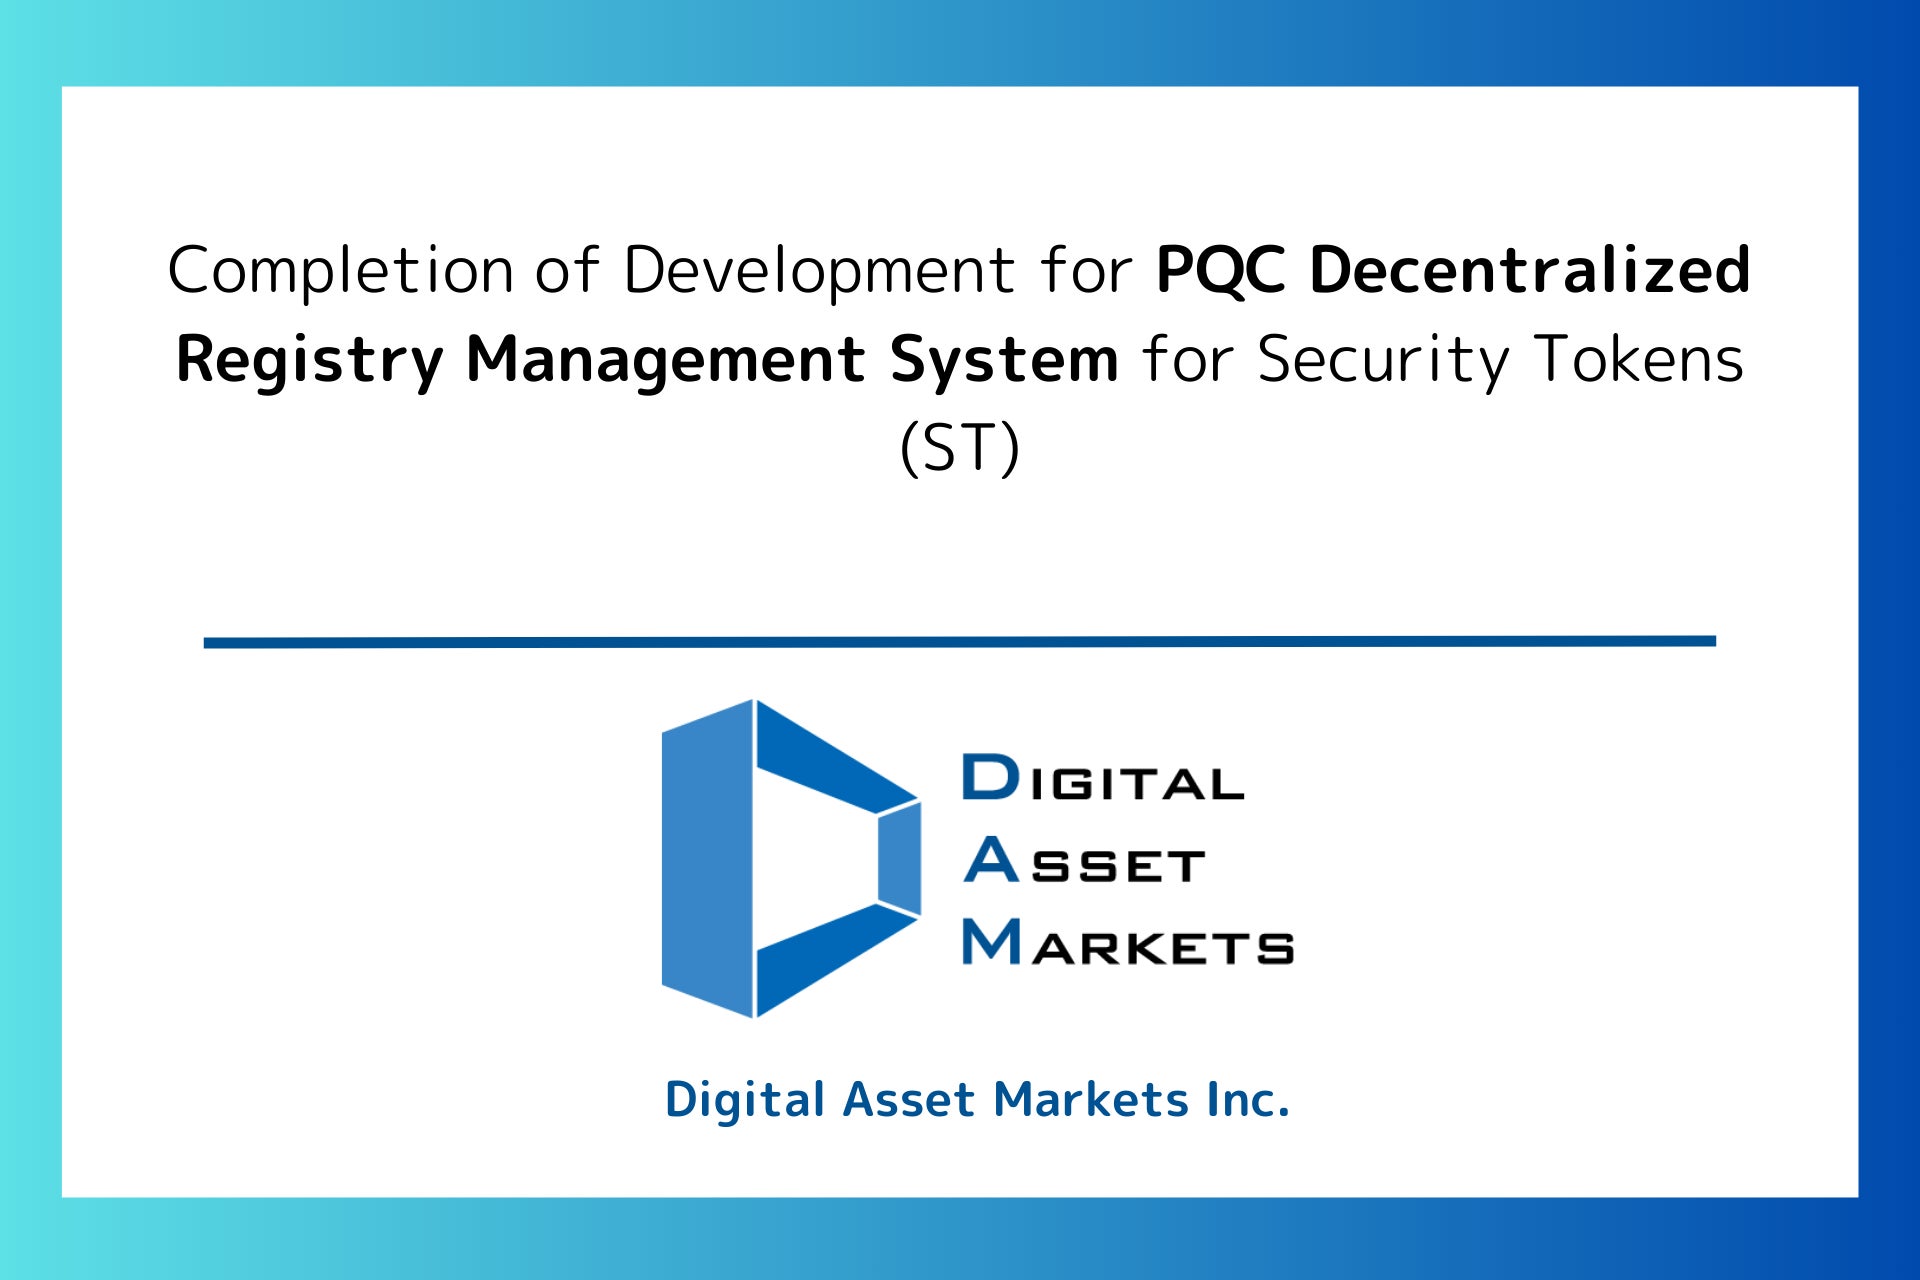 Completion of Development for PQC Decentralized Registry Management System for Security Tokens (ST)